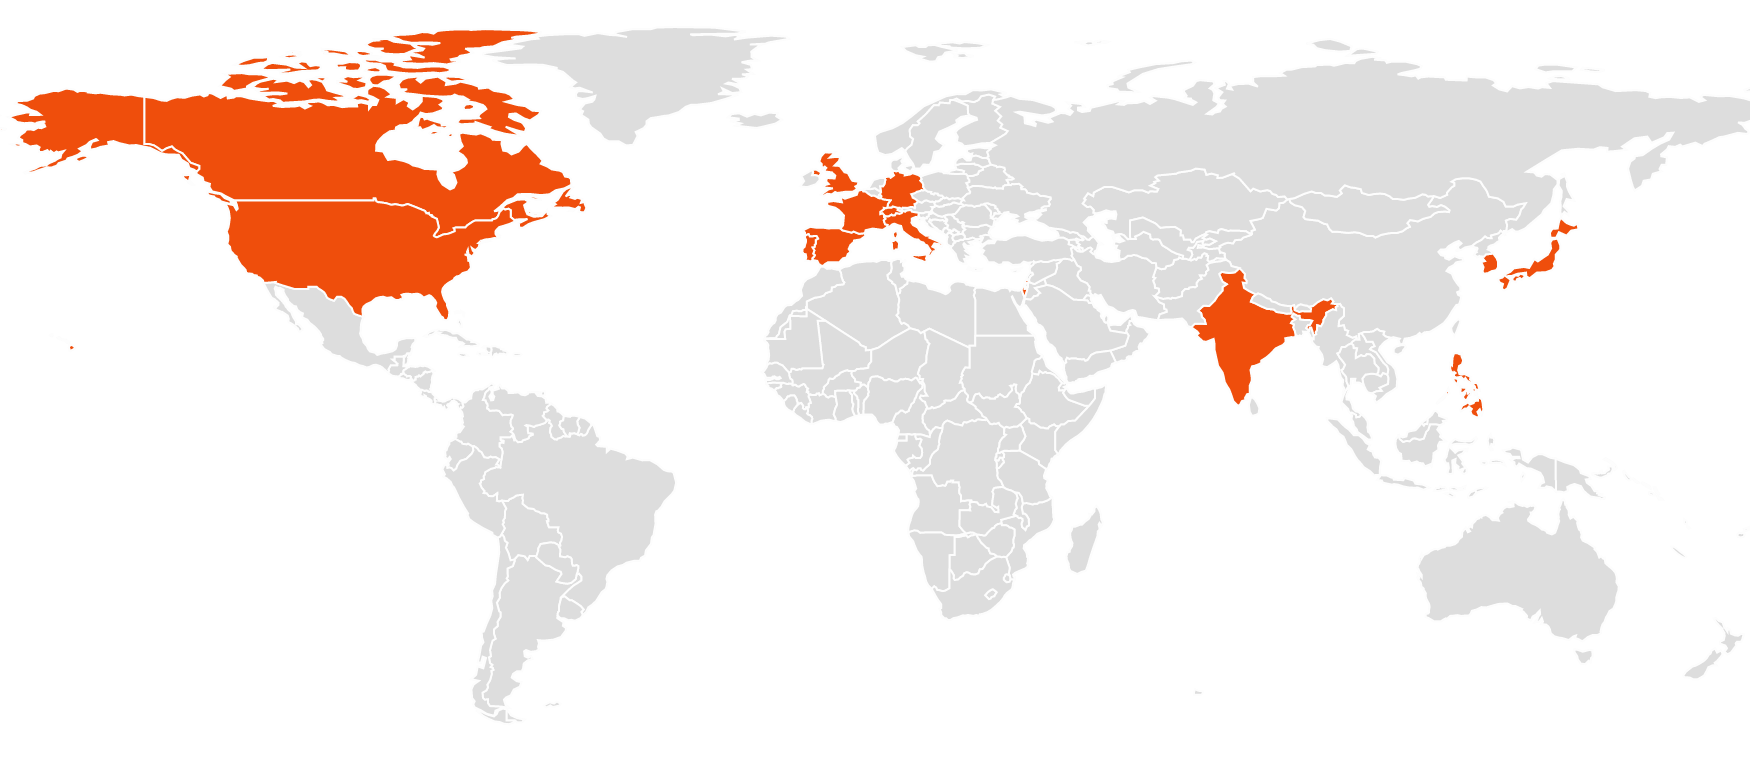 Countries with YC founder opens in the first 24 hours